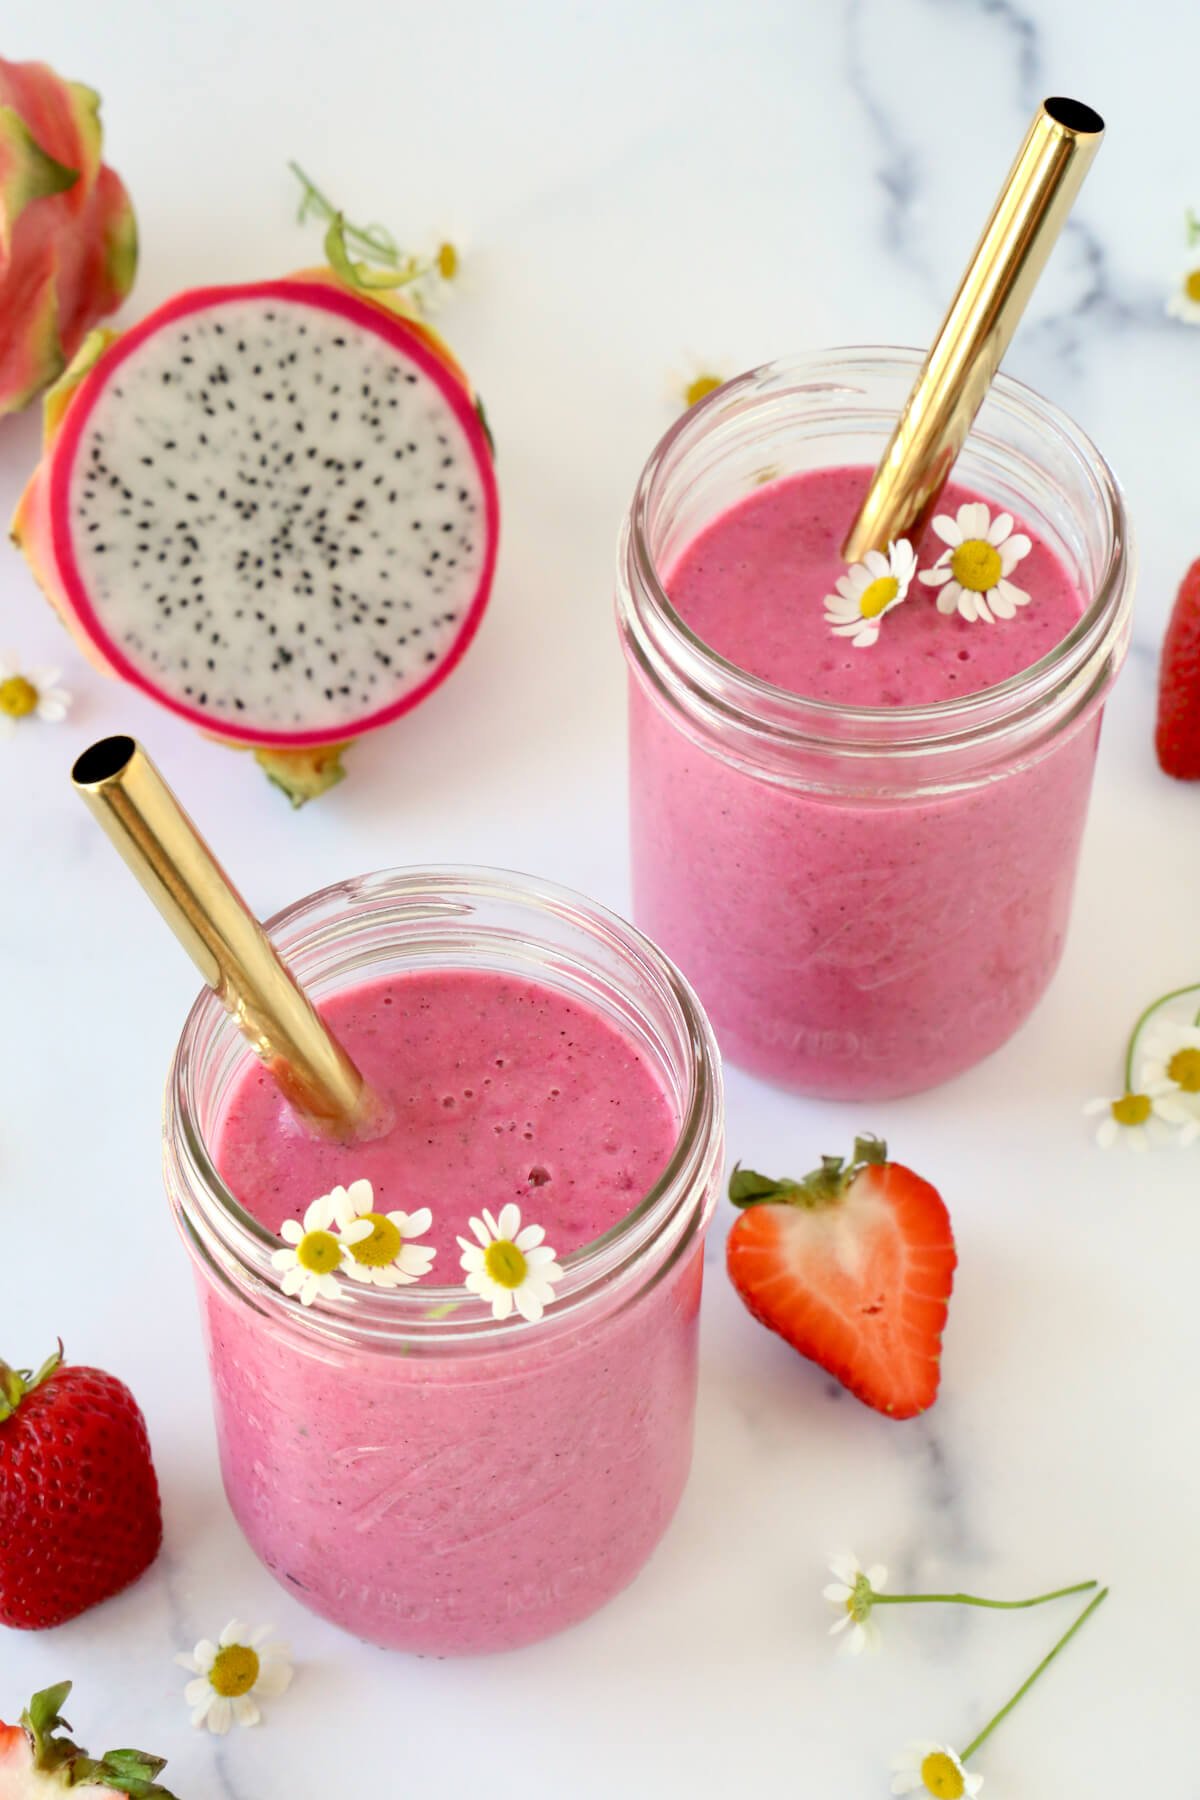 A clear glass with bright pink smoothie inside and a gold straw and small white flowers.